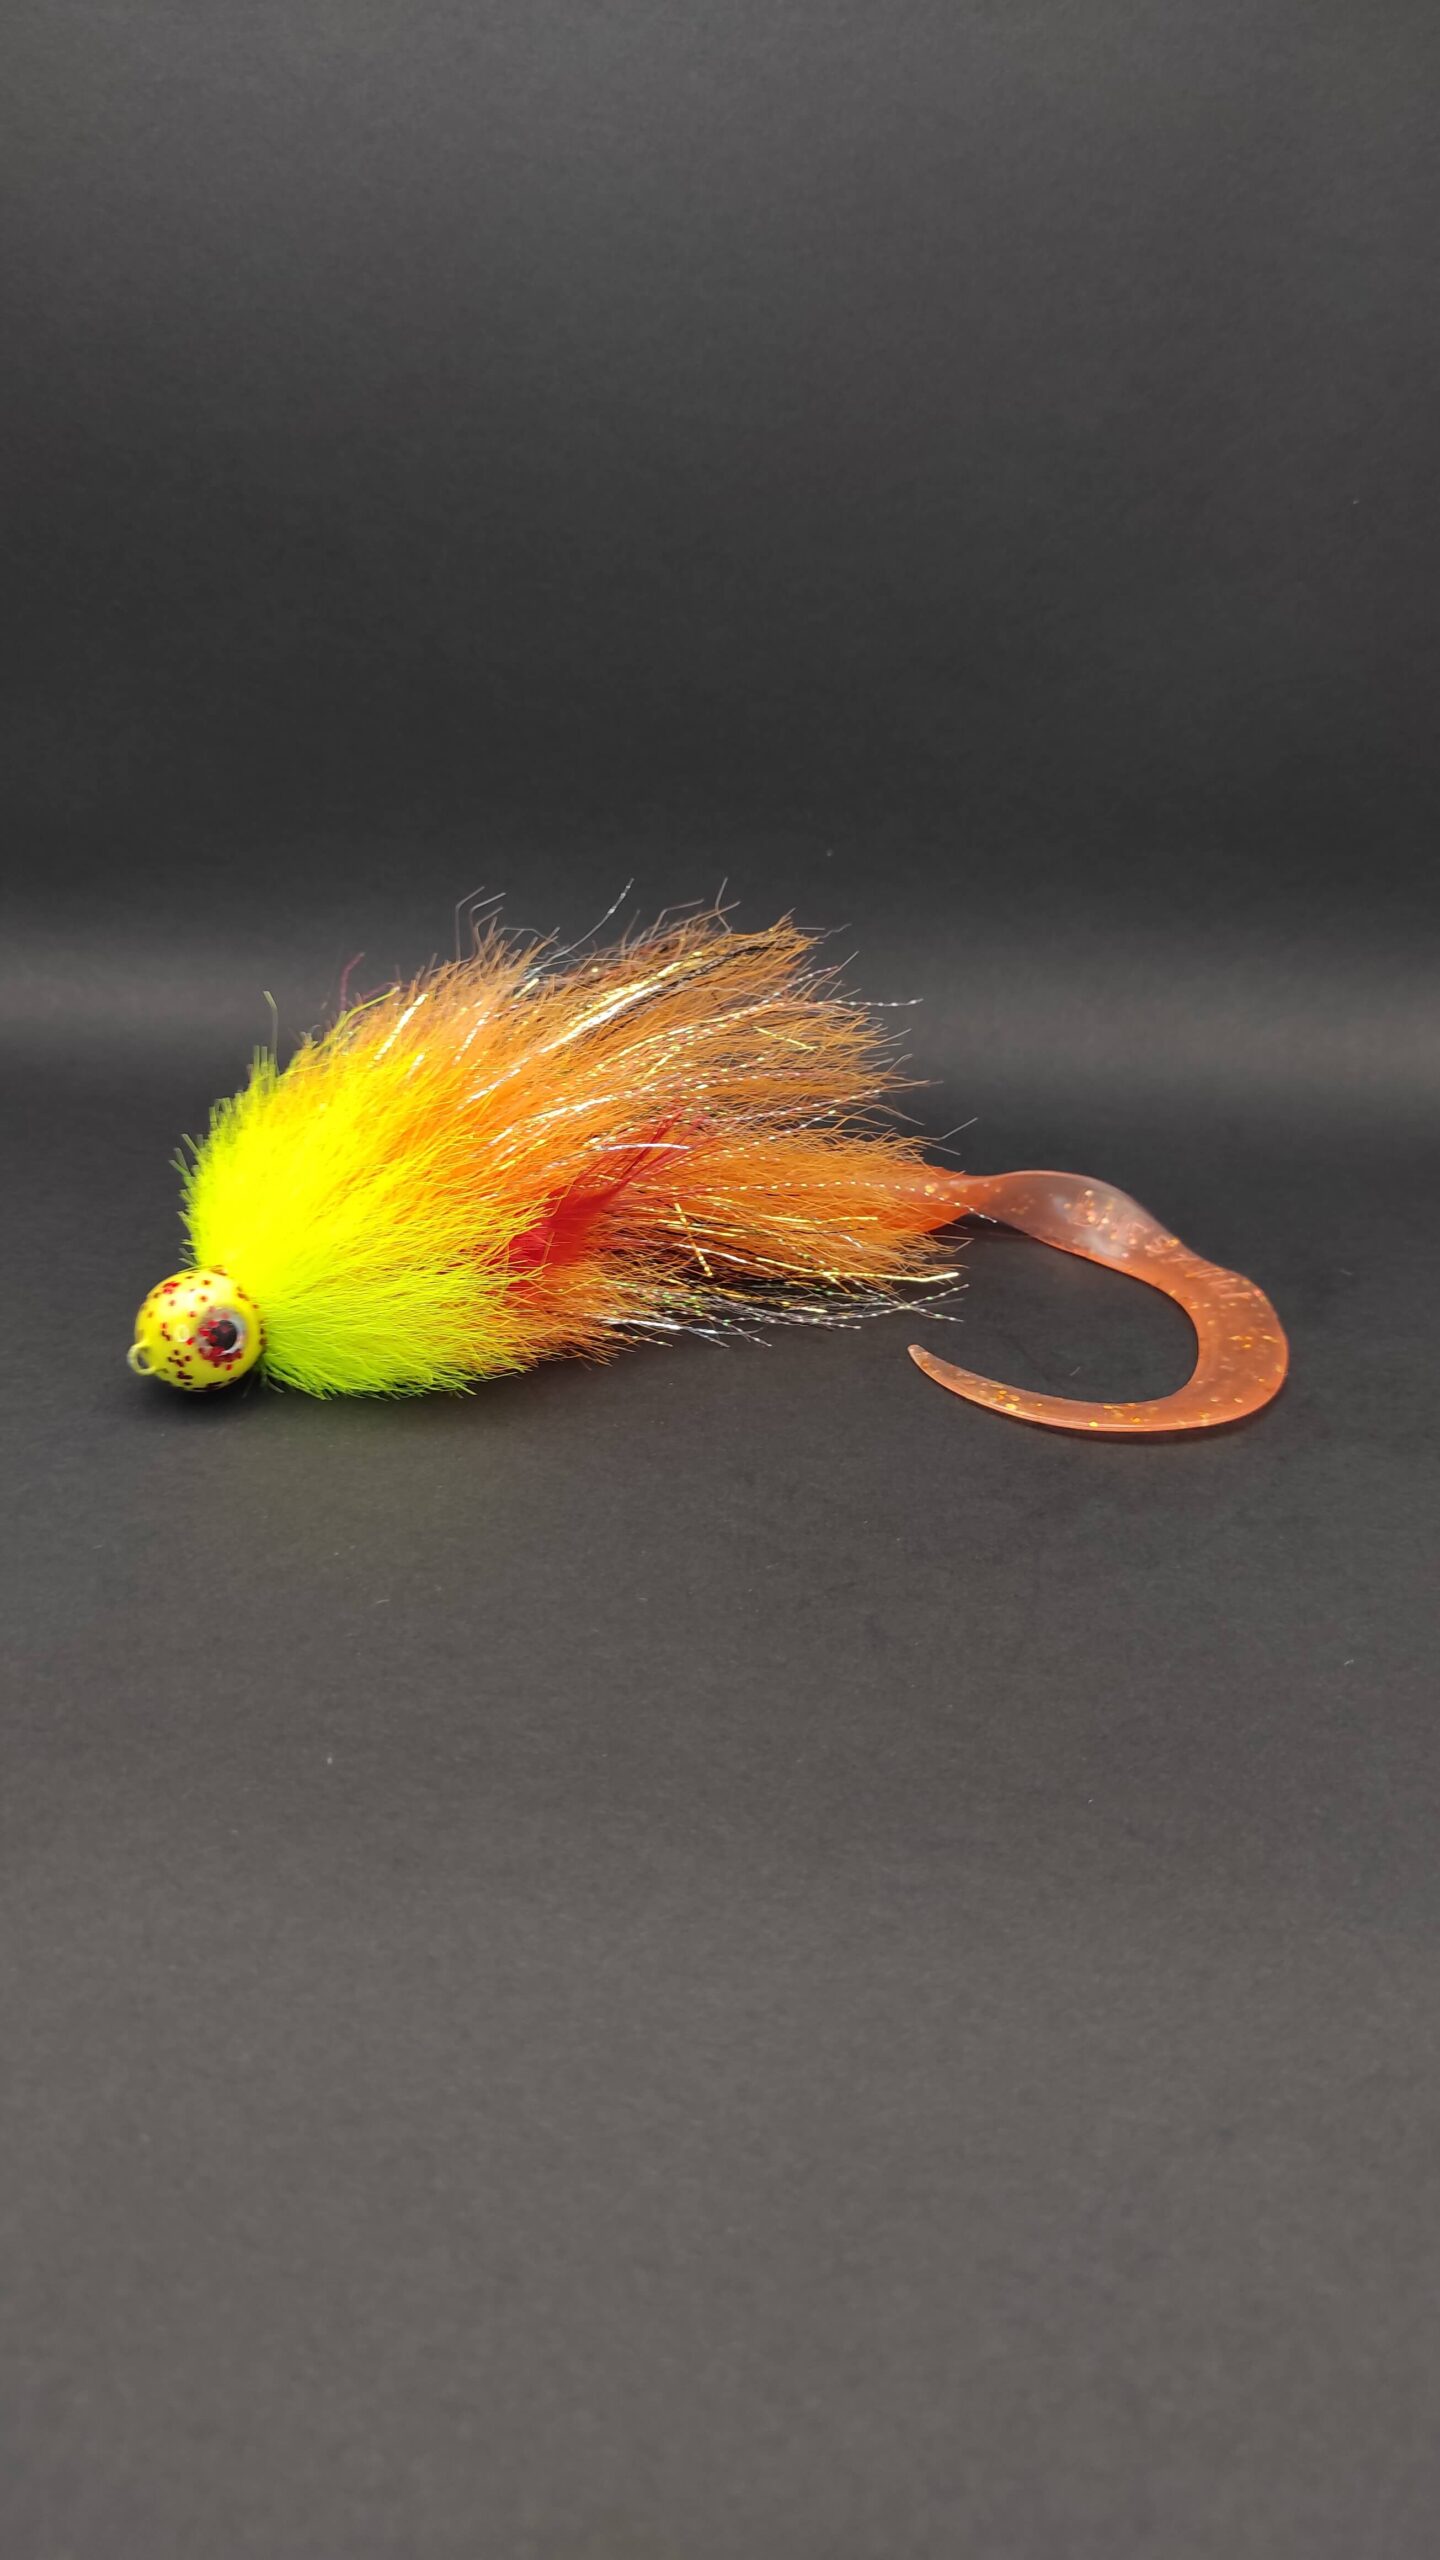 L.E. 30gr.25cm.2xhooks6_0. Yellow Orange - Crafted Catches Lures